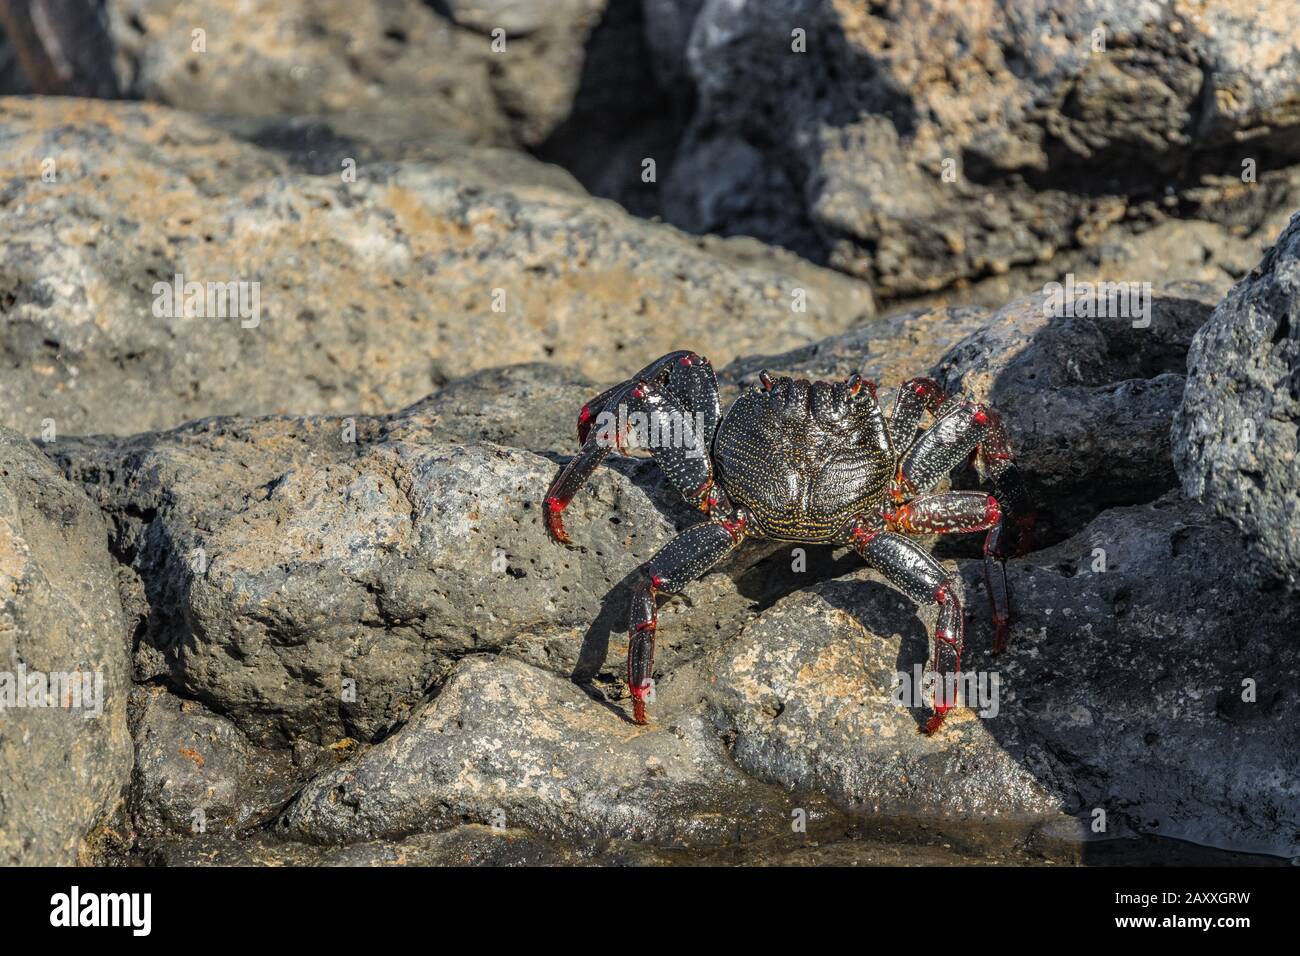 Red rock crab - Grapsus adscensionis - crawling on dark lava stones to bask in the sun. Southern ocean shore of Tenerife, Canary Islands, Spain. Stock Photo